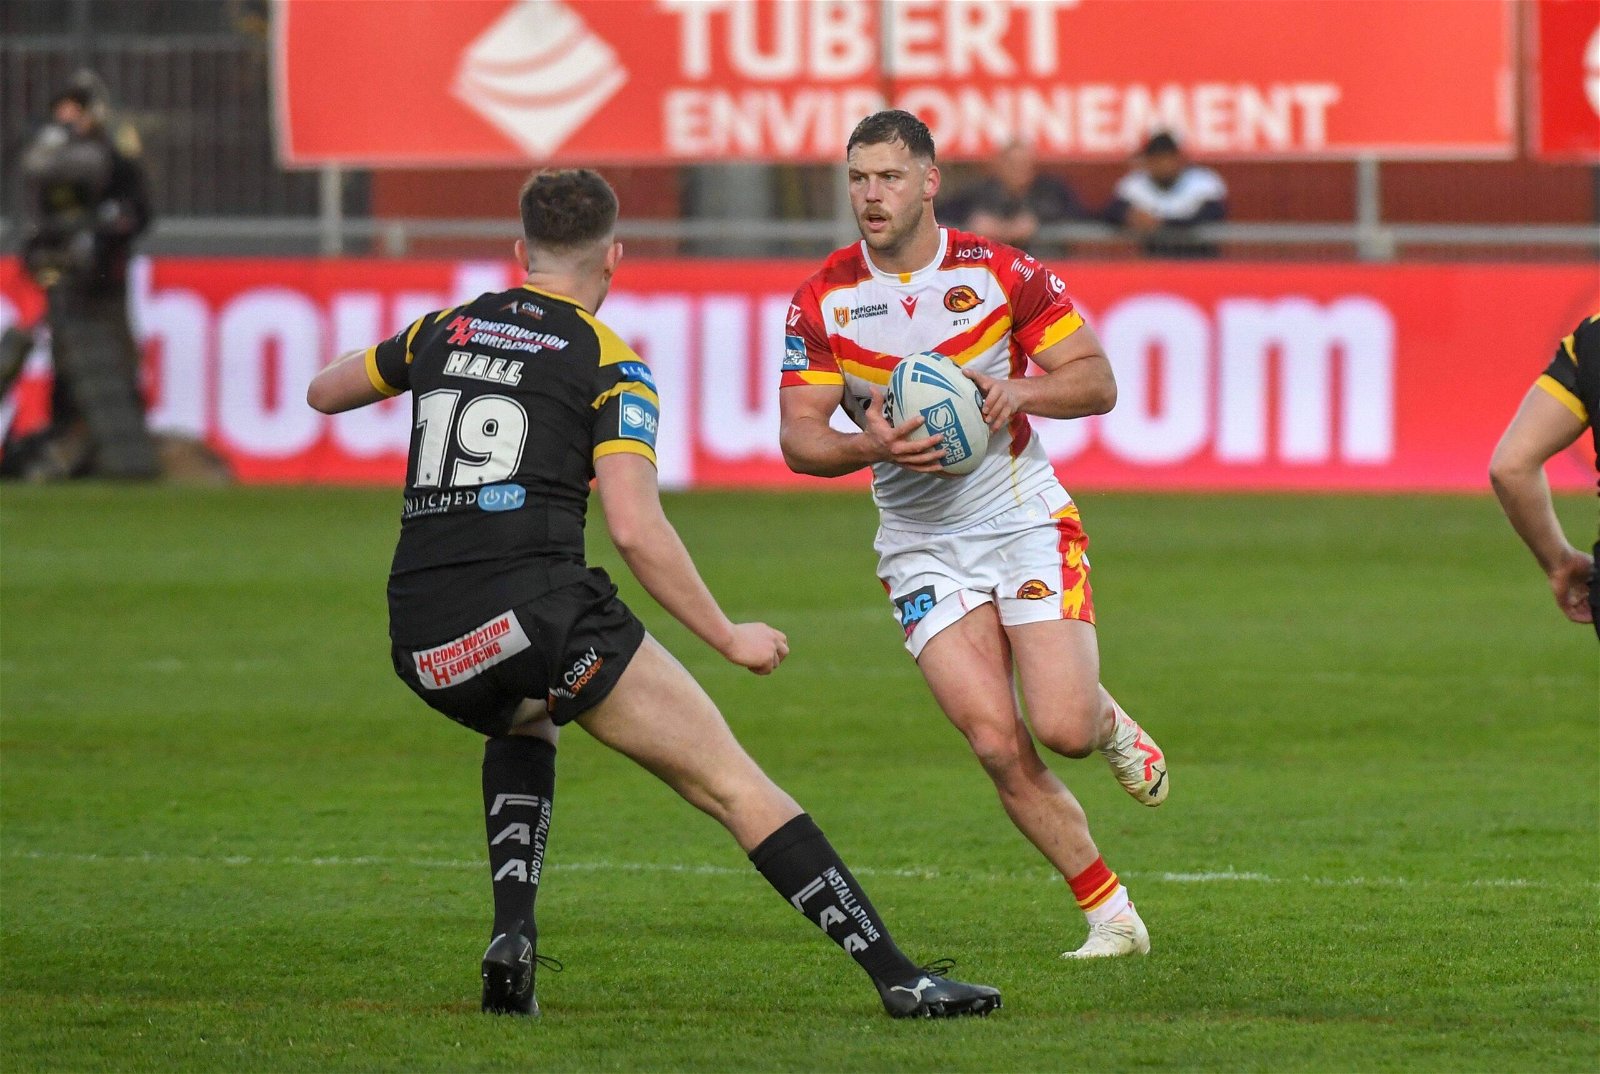 Catalans Dragons player Bayley Sironen faces Castleford Tigers. He faces Super League diciplinary action.